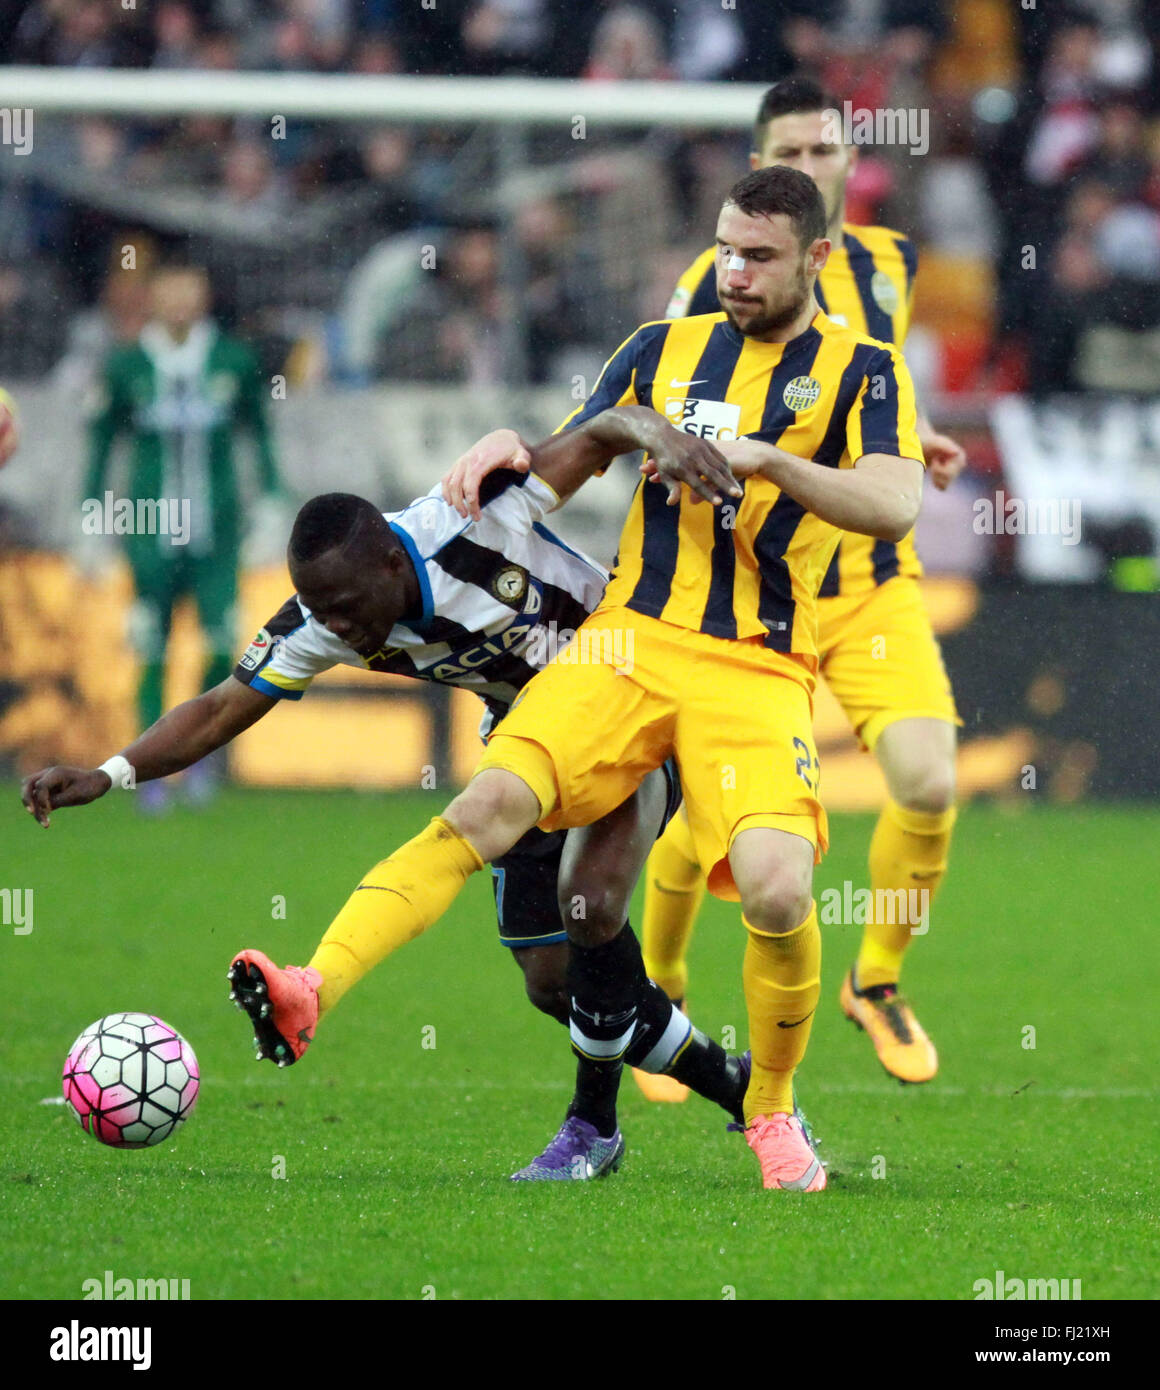 Udine, Italy. 28th Feb, 2016. Udine, Italy. 28th Feb, 2016. Hellas Verona's midfielder Artur Ionita (R) fights for the ball with Udinese's midfielder Emmanuel Agyemang Badu during the Italian Serie A football match between Udinese Calcio v Hellas Verona FC. Udinese beats 2-0 Hellas Verona in Italian Serie A football match, goals by Emmanuel Badu and Cyril Thereau at Dacia Arena in Udine. © Andrea Spinelli/Pacific Press/Alamy Live News Credit:  PACIFIC PRESS/Alamy Live News Stock Photo